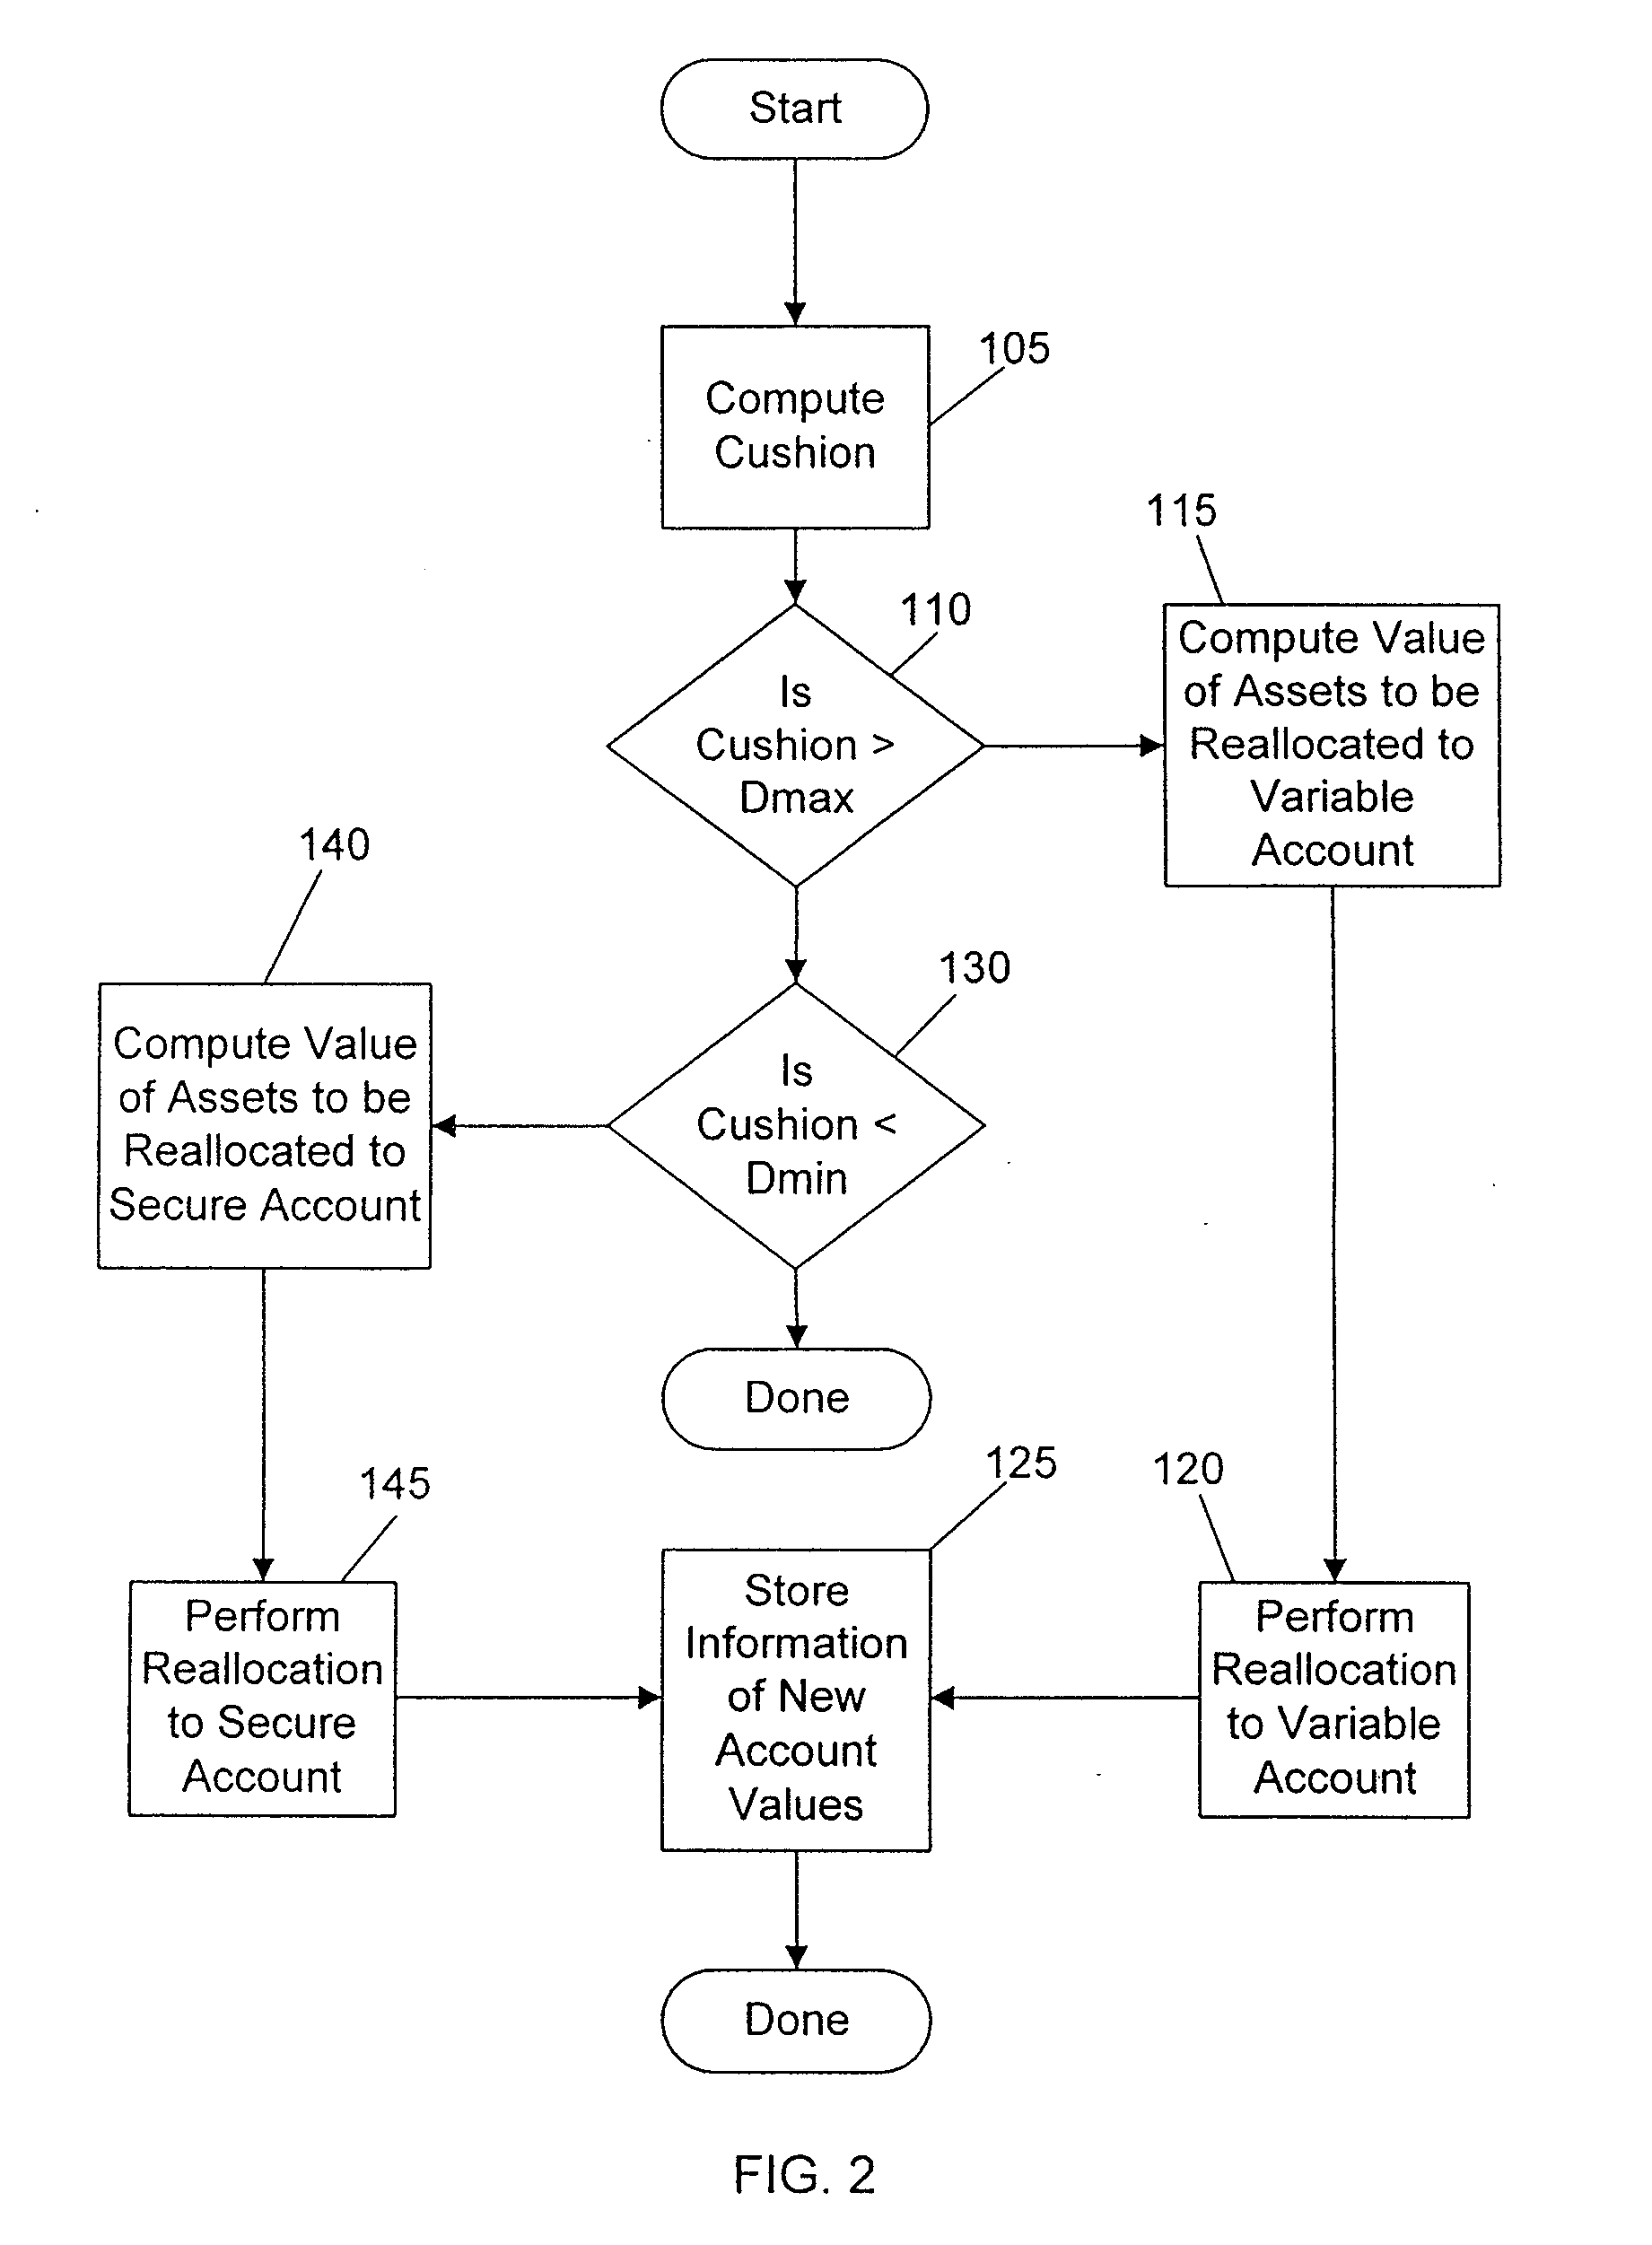 System, Method, and Computer Program Product for Allocating Assets Among a Plurality of Investments to Guarantee a Predetermined Value at the End of a Predetermined Period